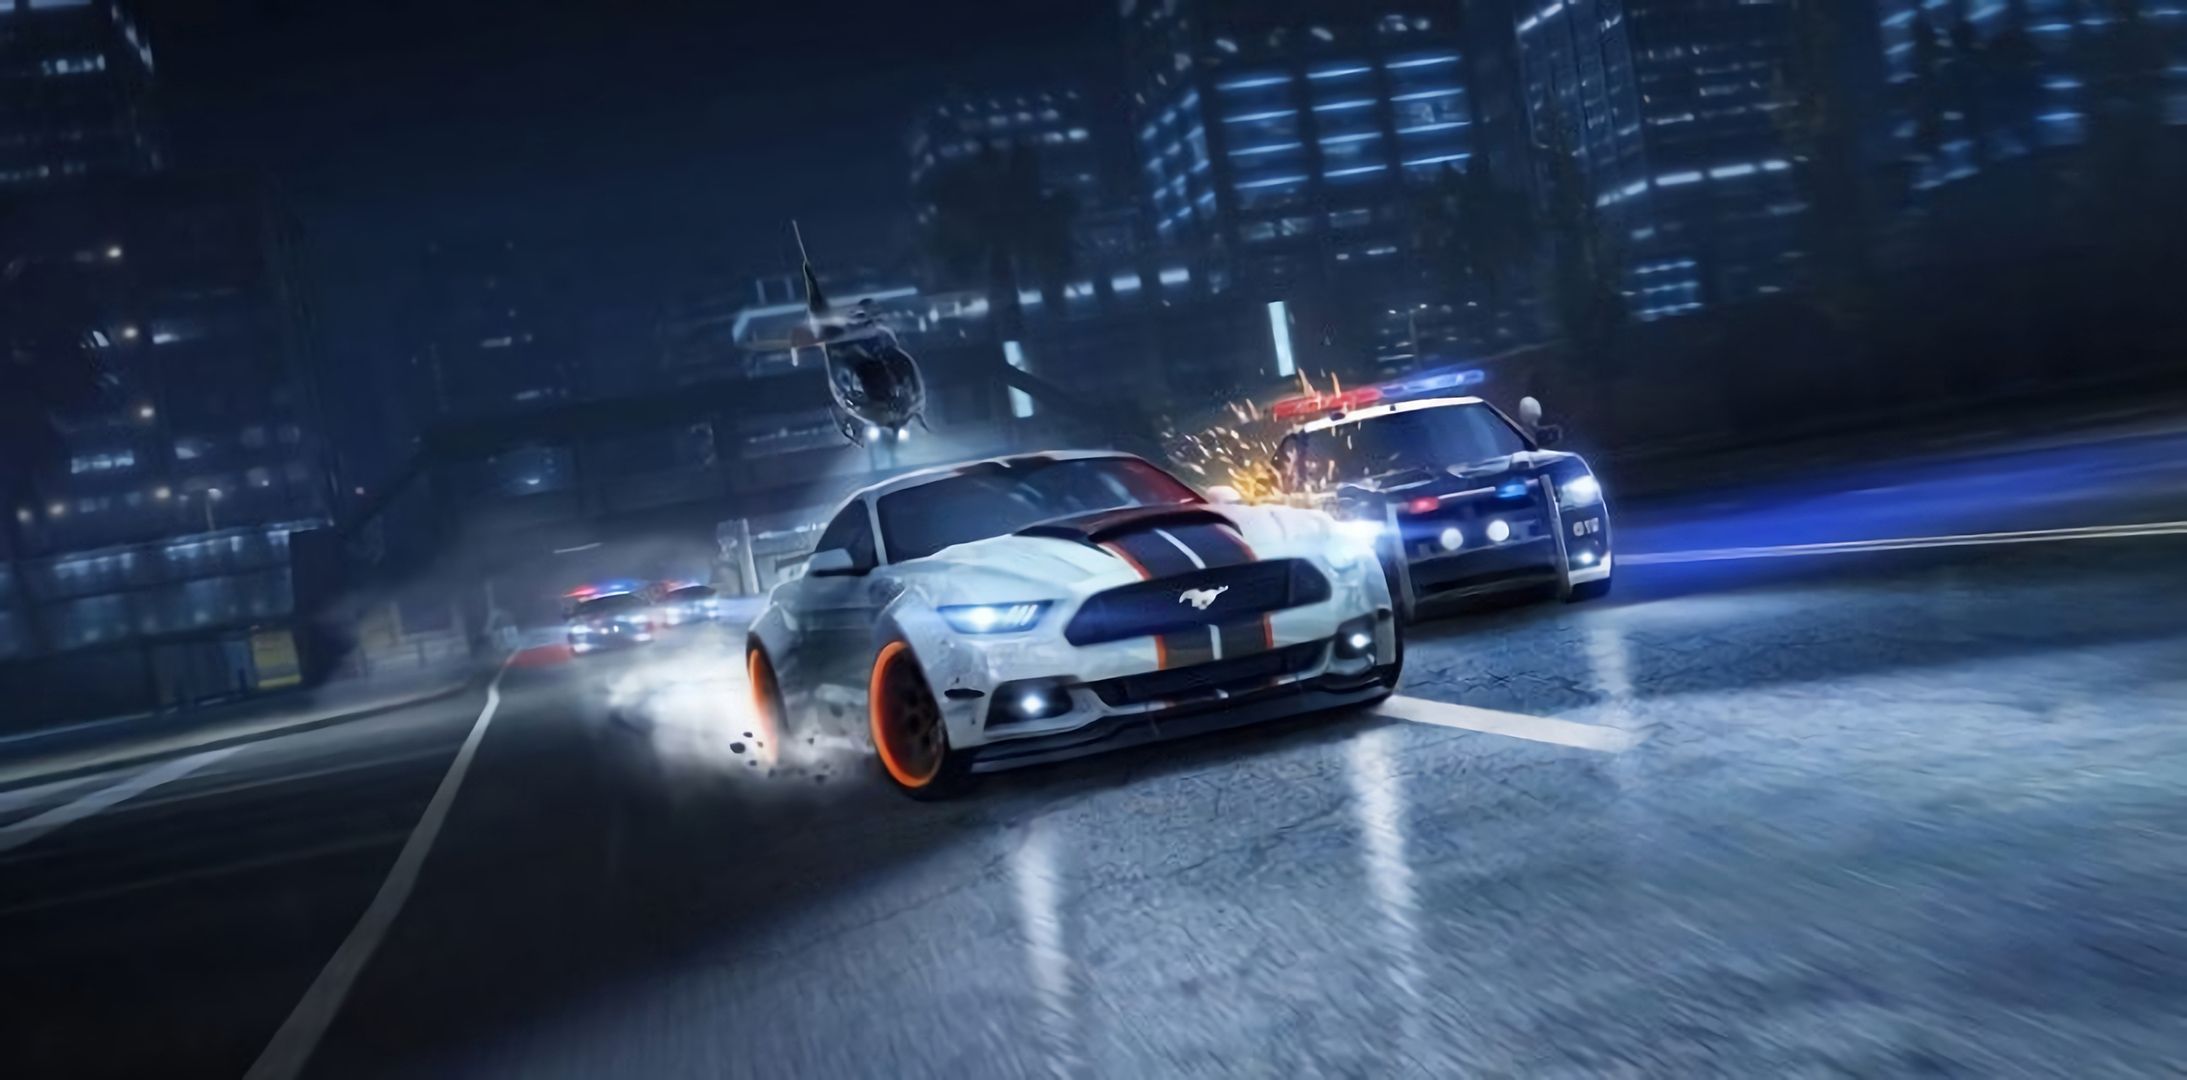 Need for Speed PC Wallpaper Free Need for Speed PC Background